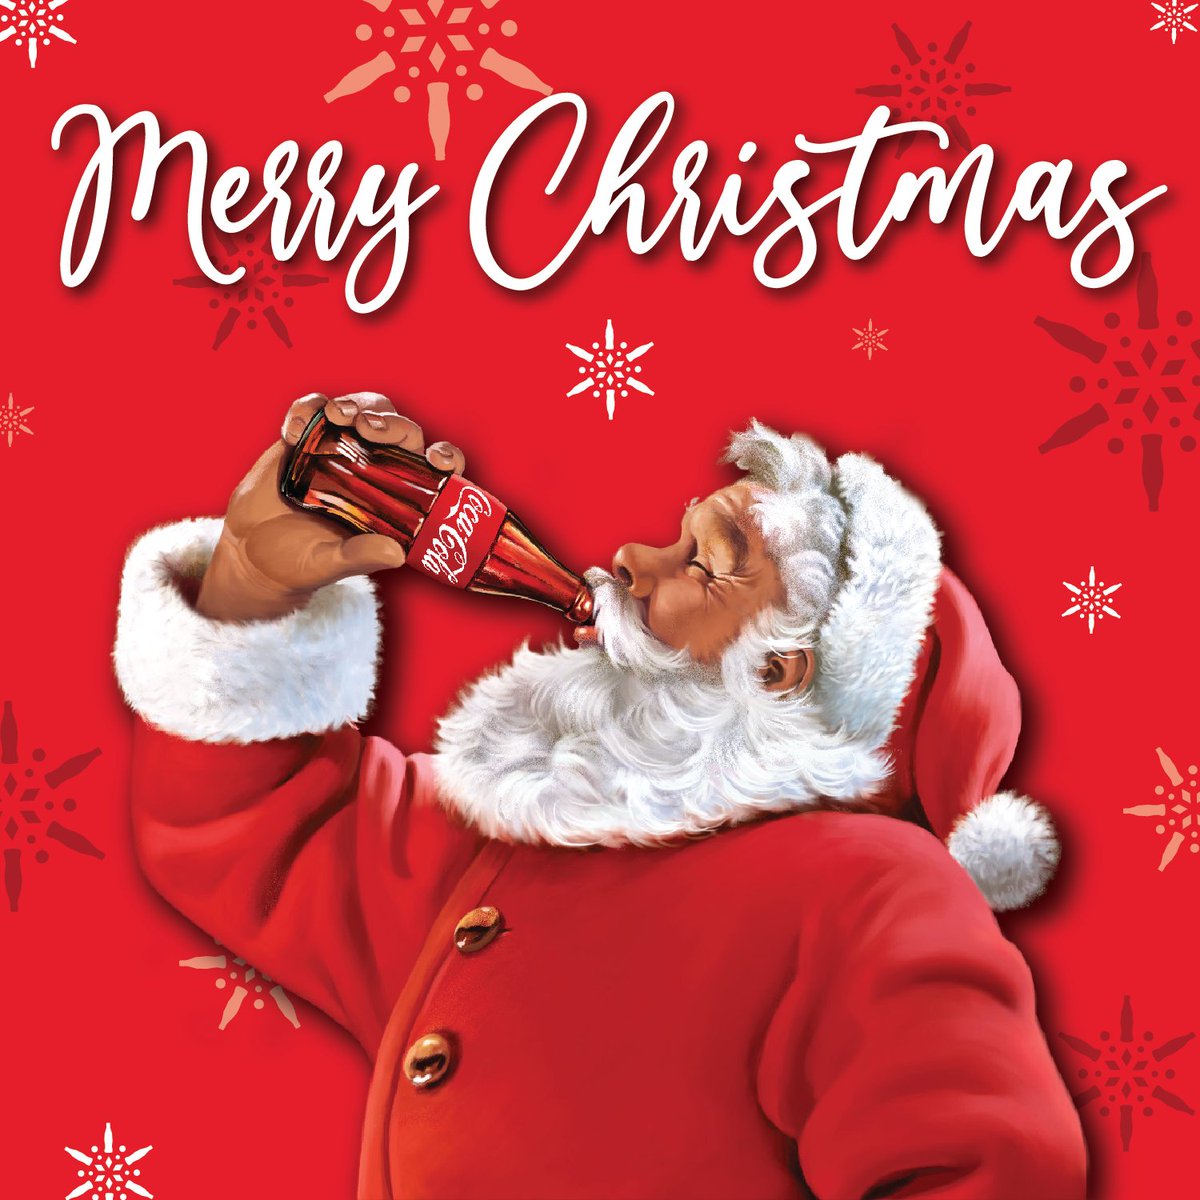 Wishing a very Merry Christmas to all of our friends and family in the Northeast and beyond! #CokeNortheast #MerryChristmas #CocaCola #Santa